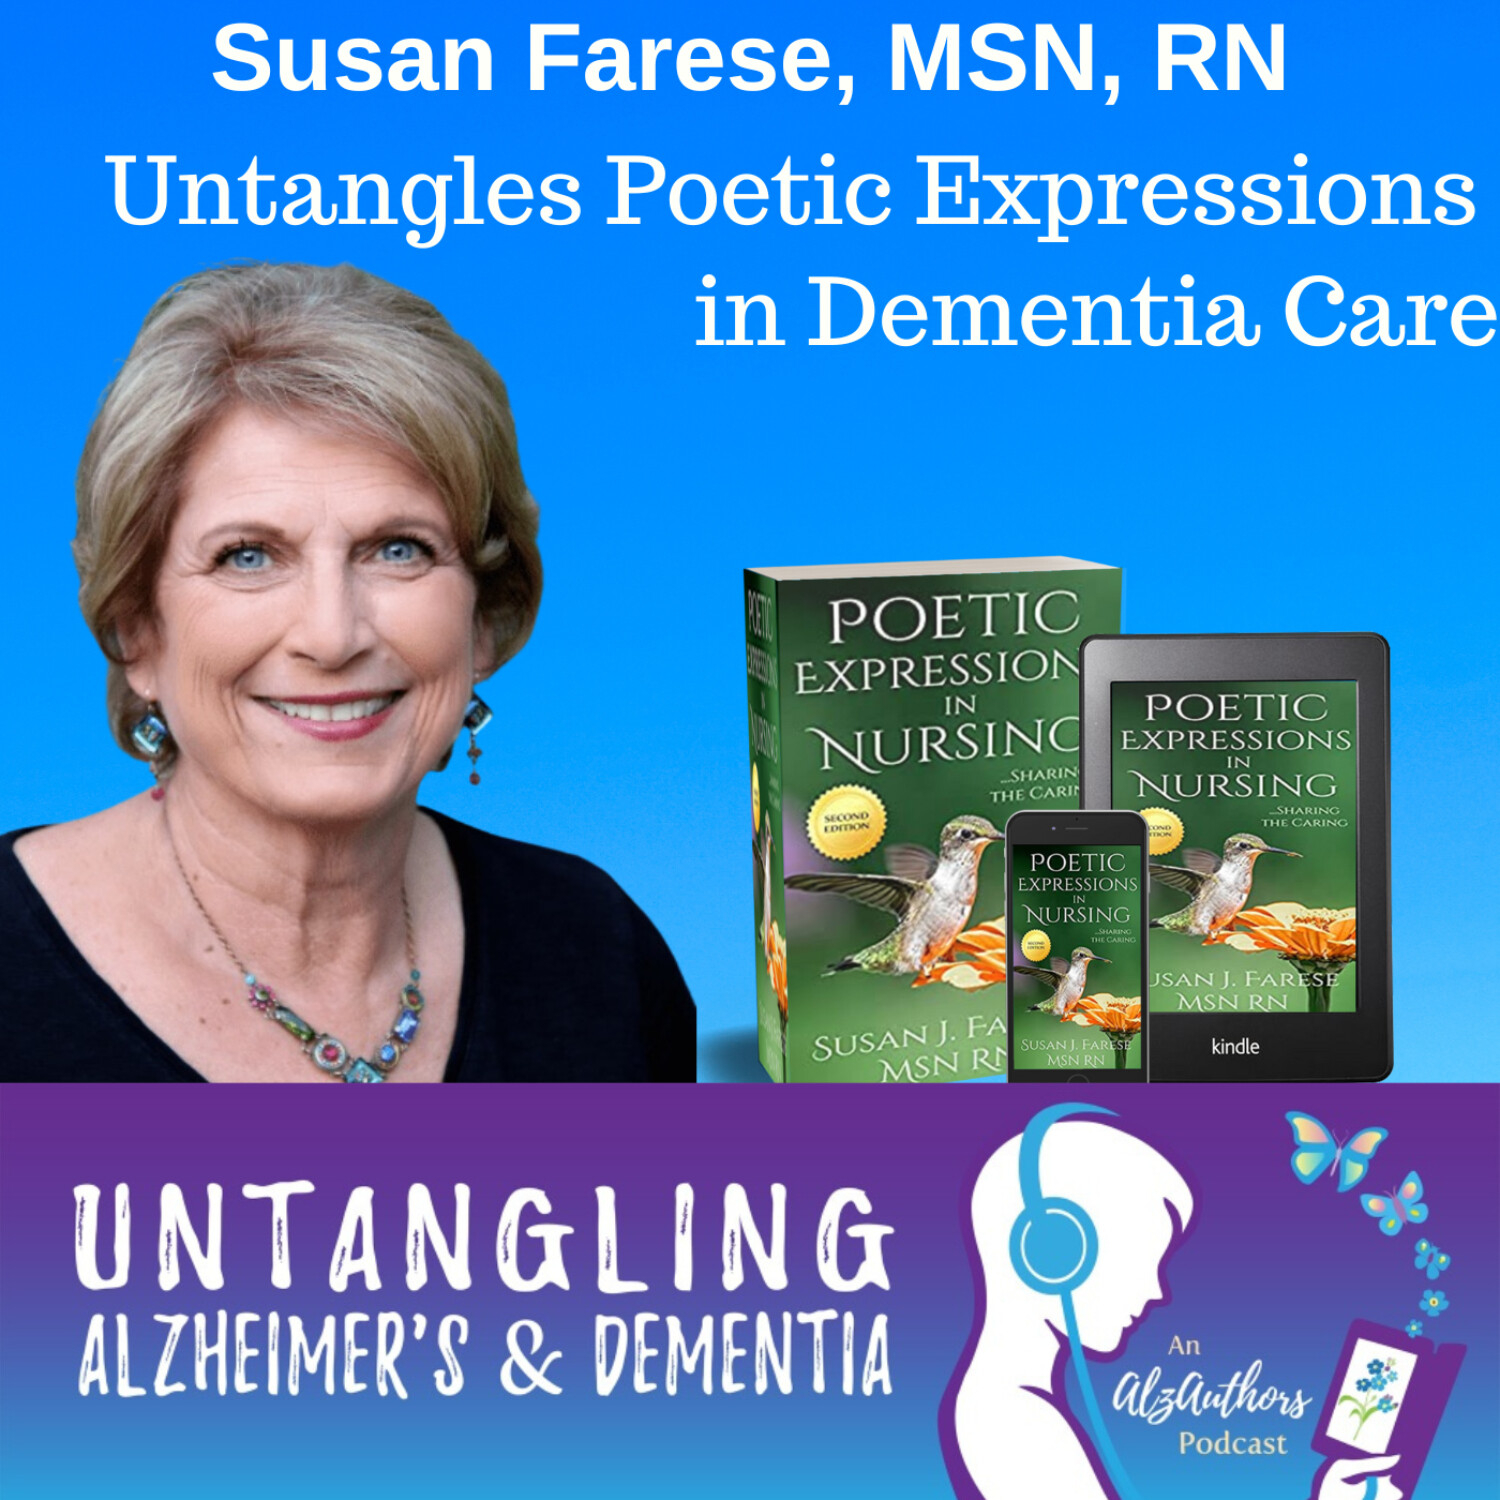 Susan Farese MSN, RN Untangles Poetic Expressions in Dementia Care – final